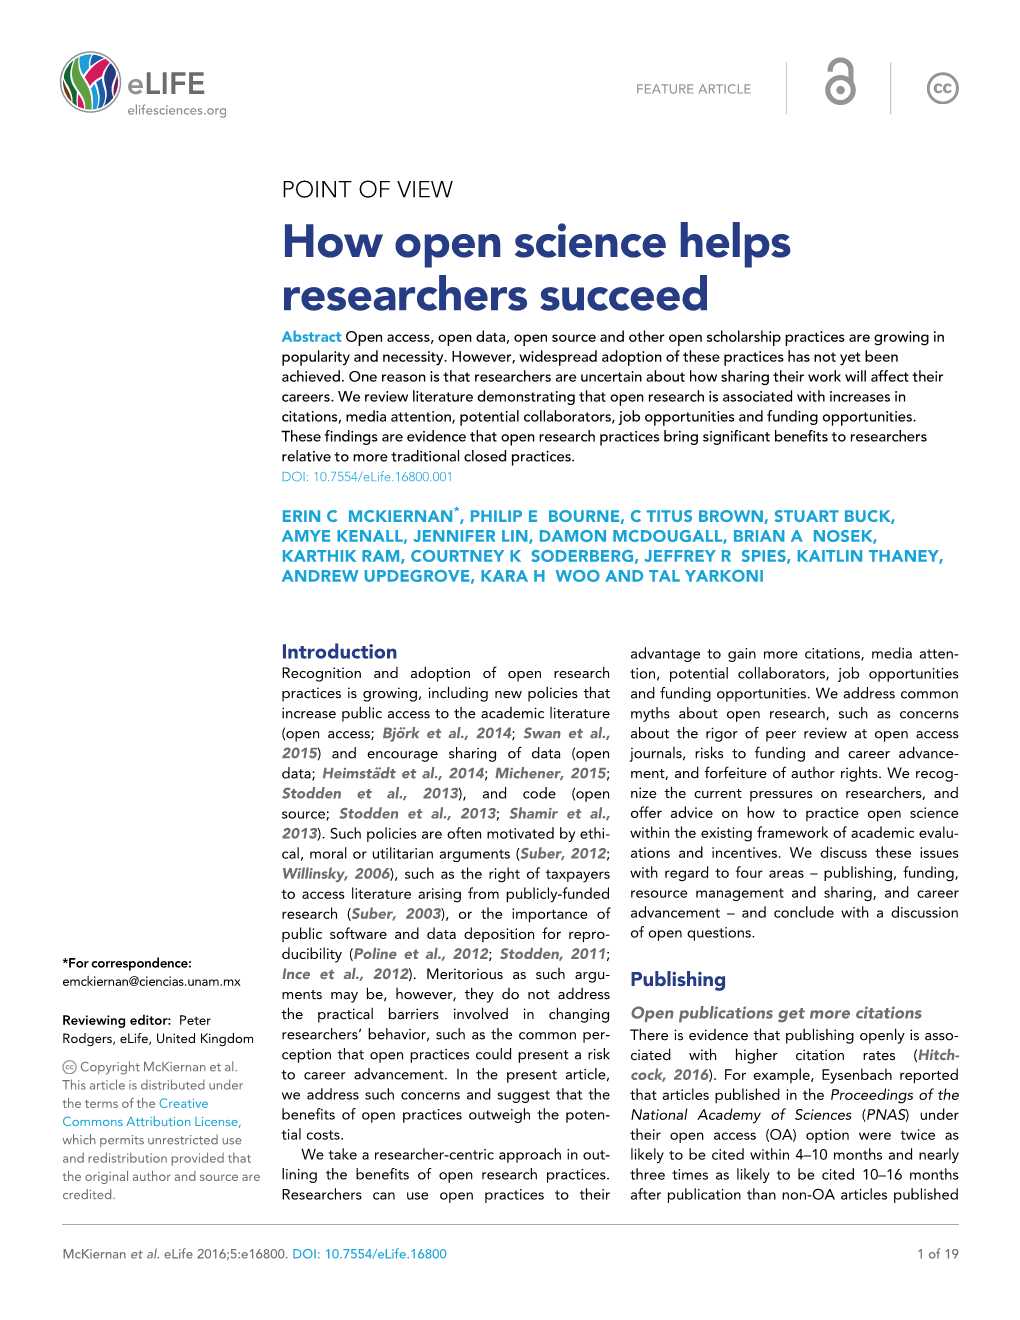 How Open Science Helps Researchers Succeed Abstract Open Access, Open Data, Open Source and Other Open Scholarship Practices Are Growing in Popularity and Necessity